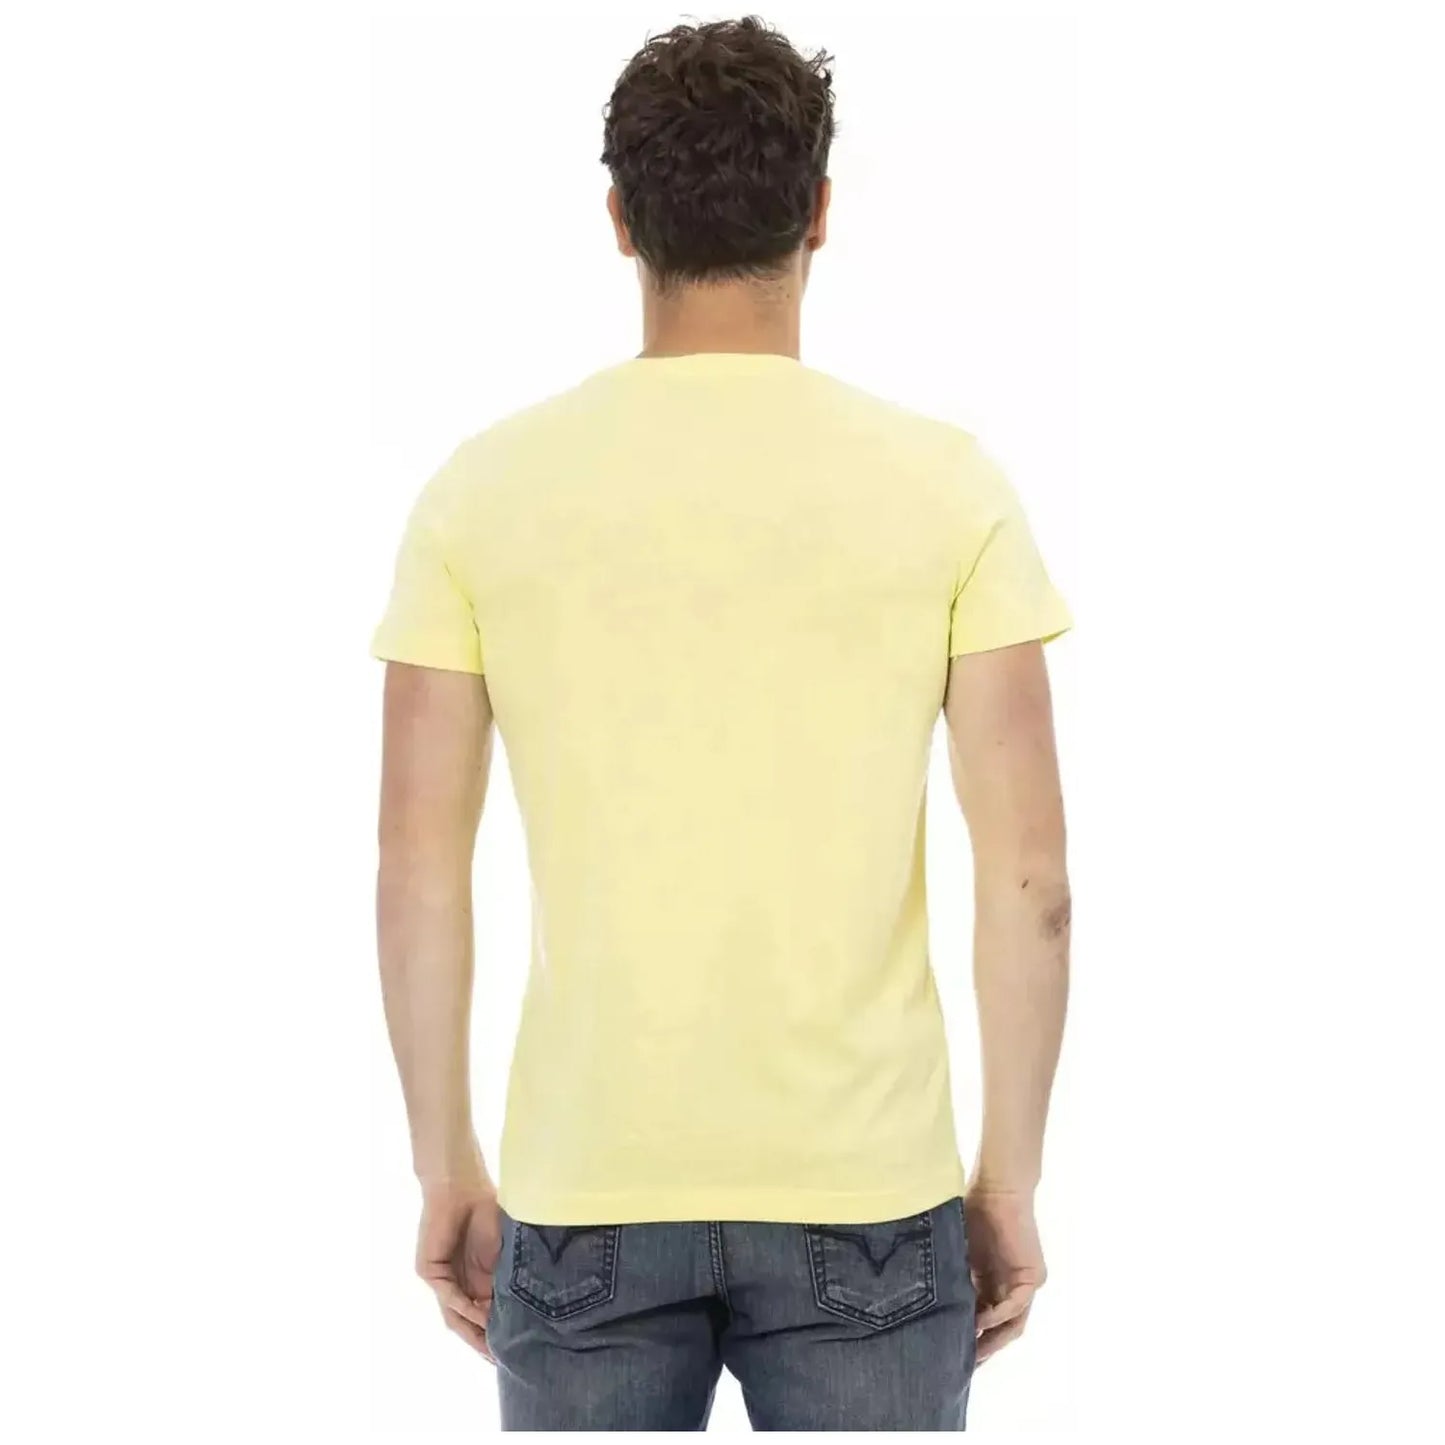 Trussardi Action Sunshine Yellow Casual Tee with Graphic Print yellow-cotton-t-shirt-13